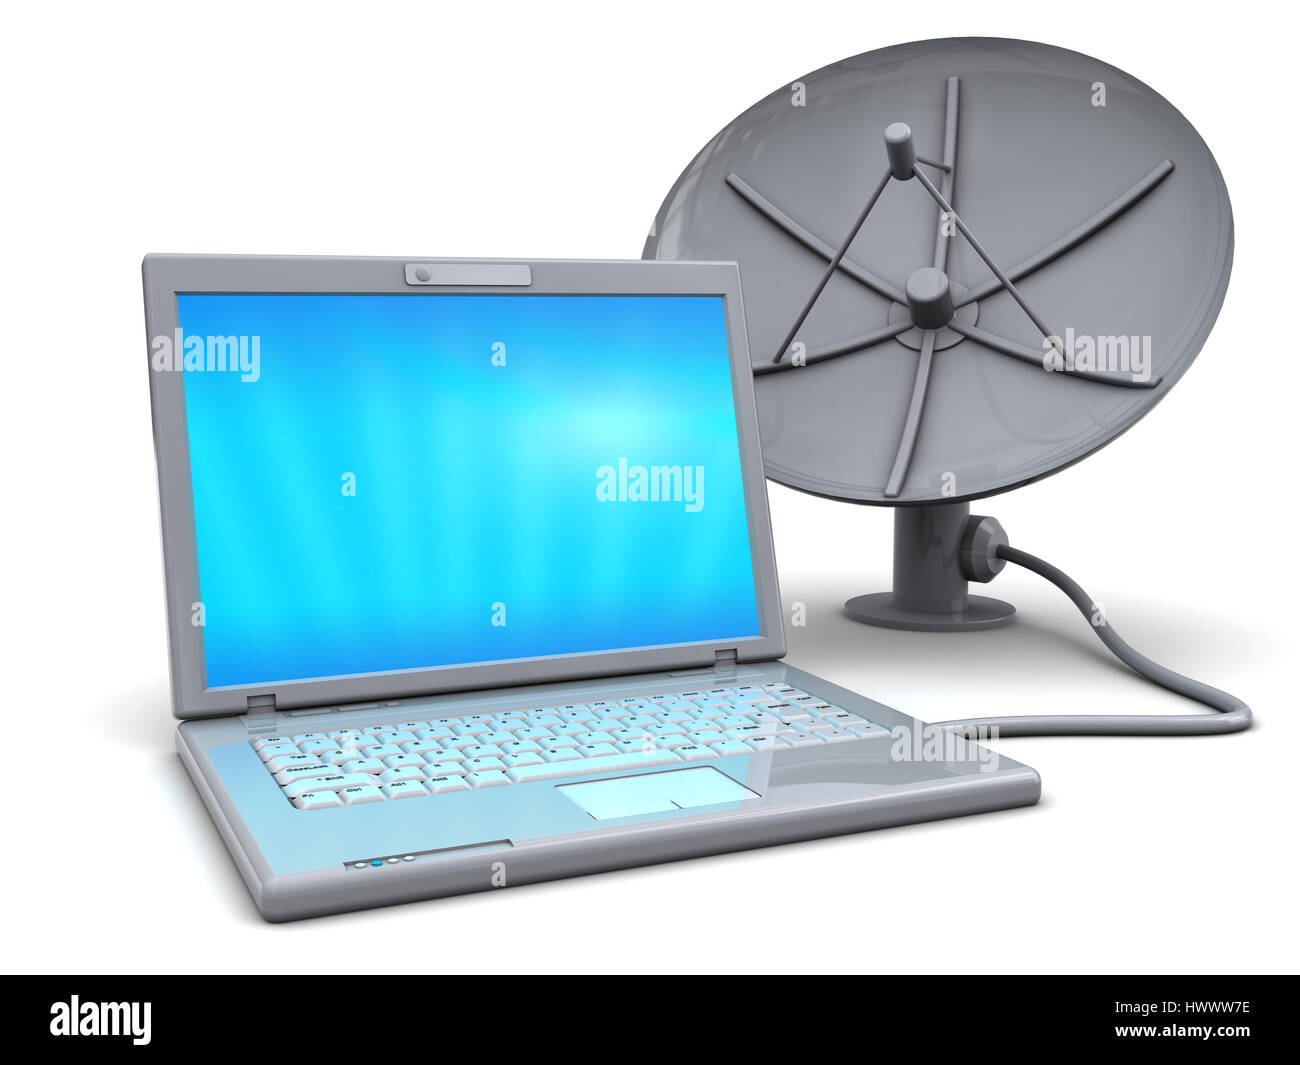 3d illustration of laptop with satellite antenna, over white background  Stock Photo - Alamy